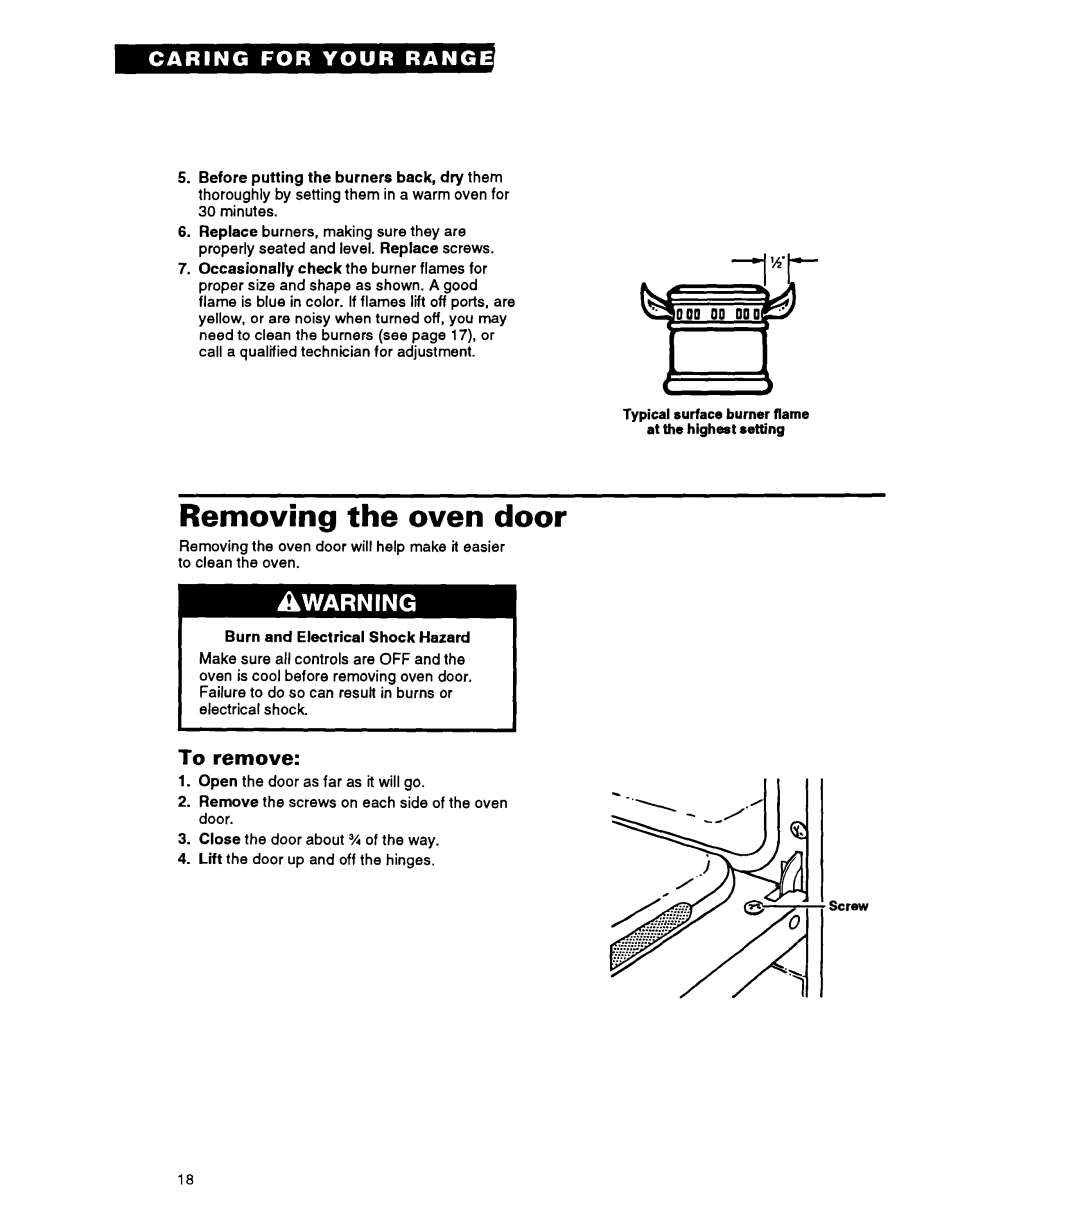 Whirlpool FGP325A manual Removing the oven door, To remove, Burn and Electrical Shock Hazard, s y.+, Screw, ‘A 